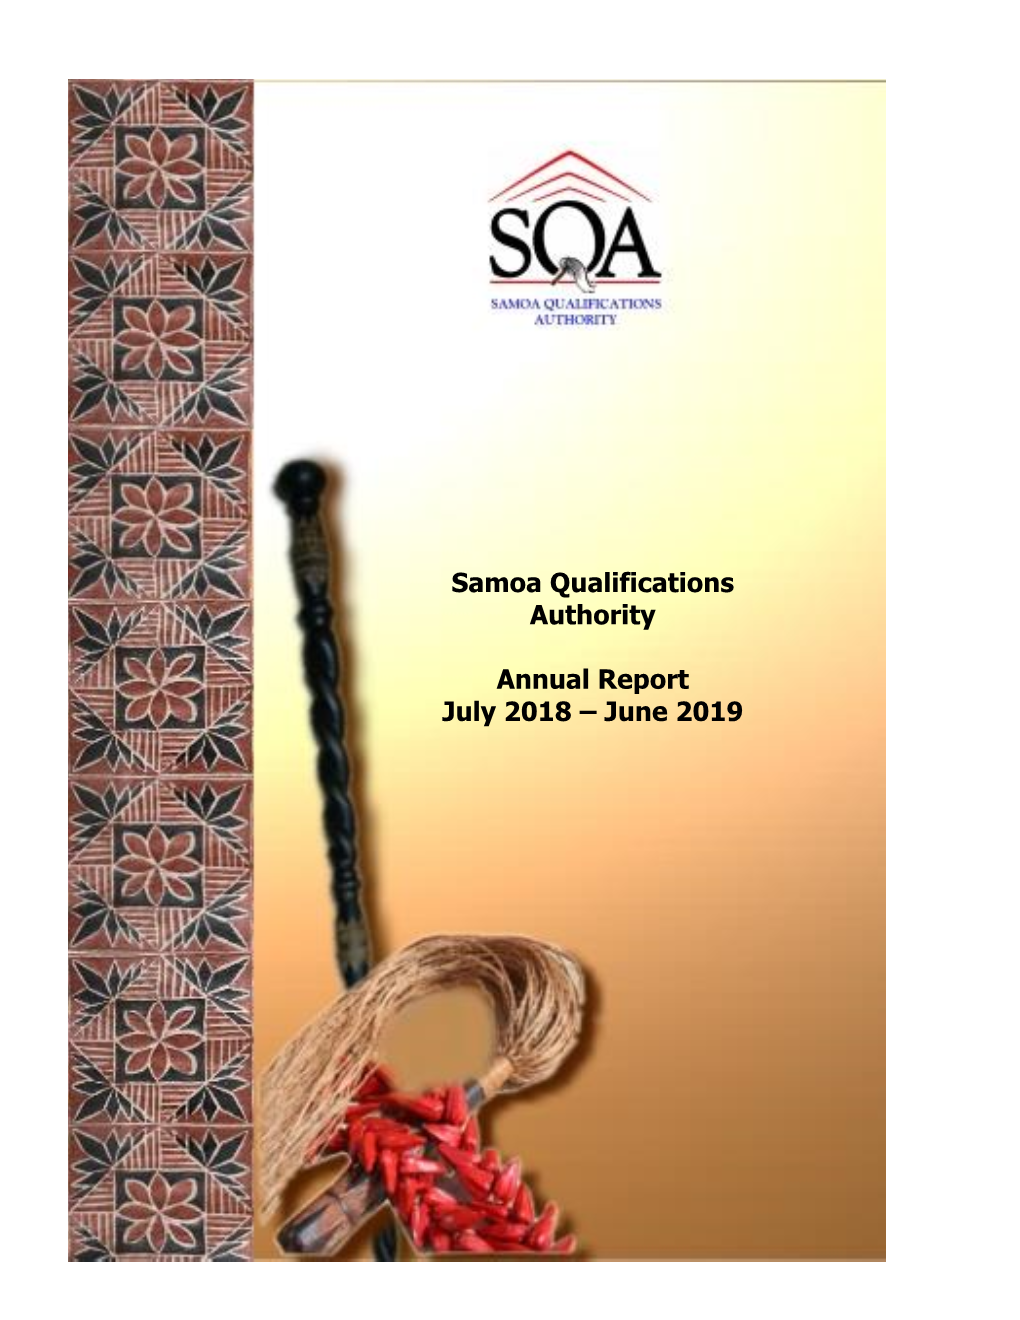 Samoa Qualifications Authority Annual Report July 2018 – June 2019